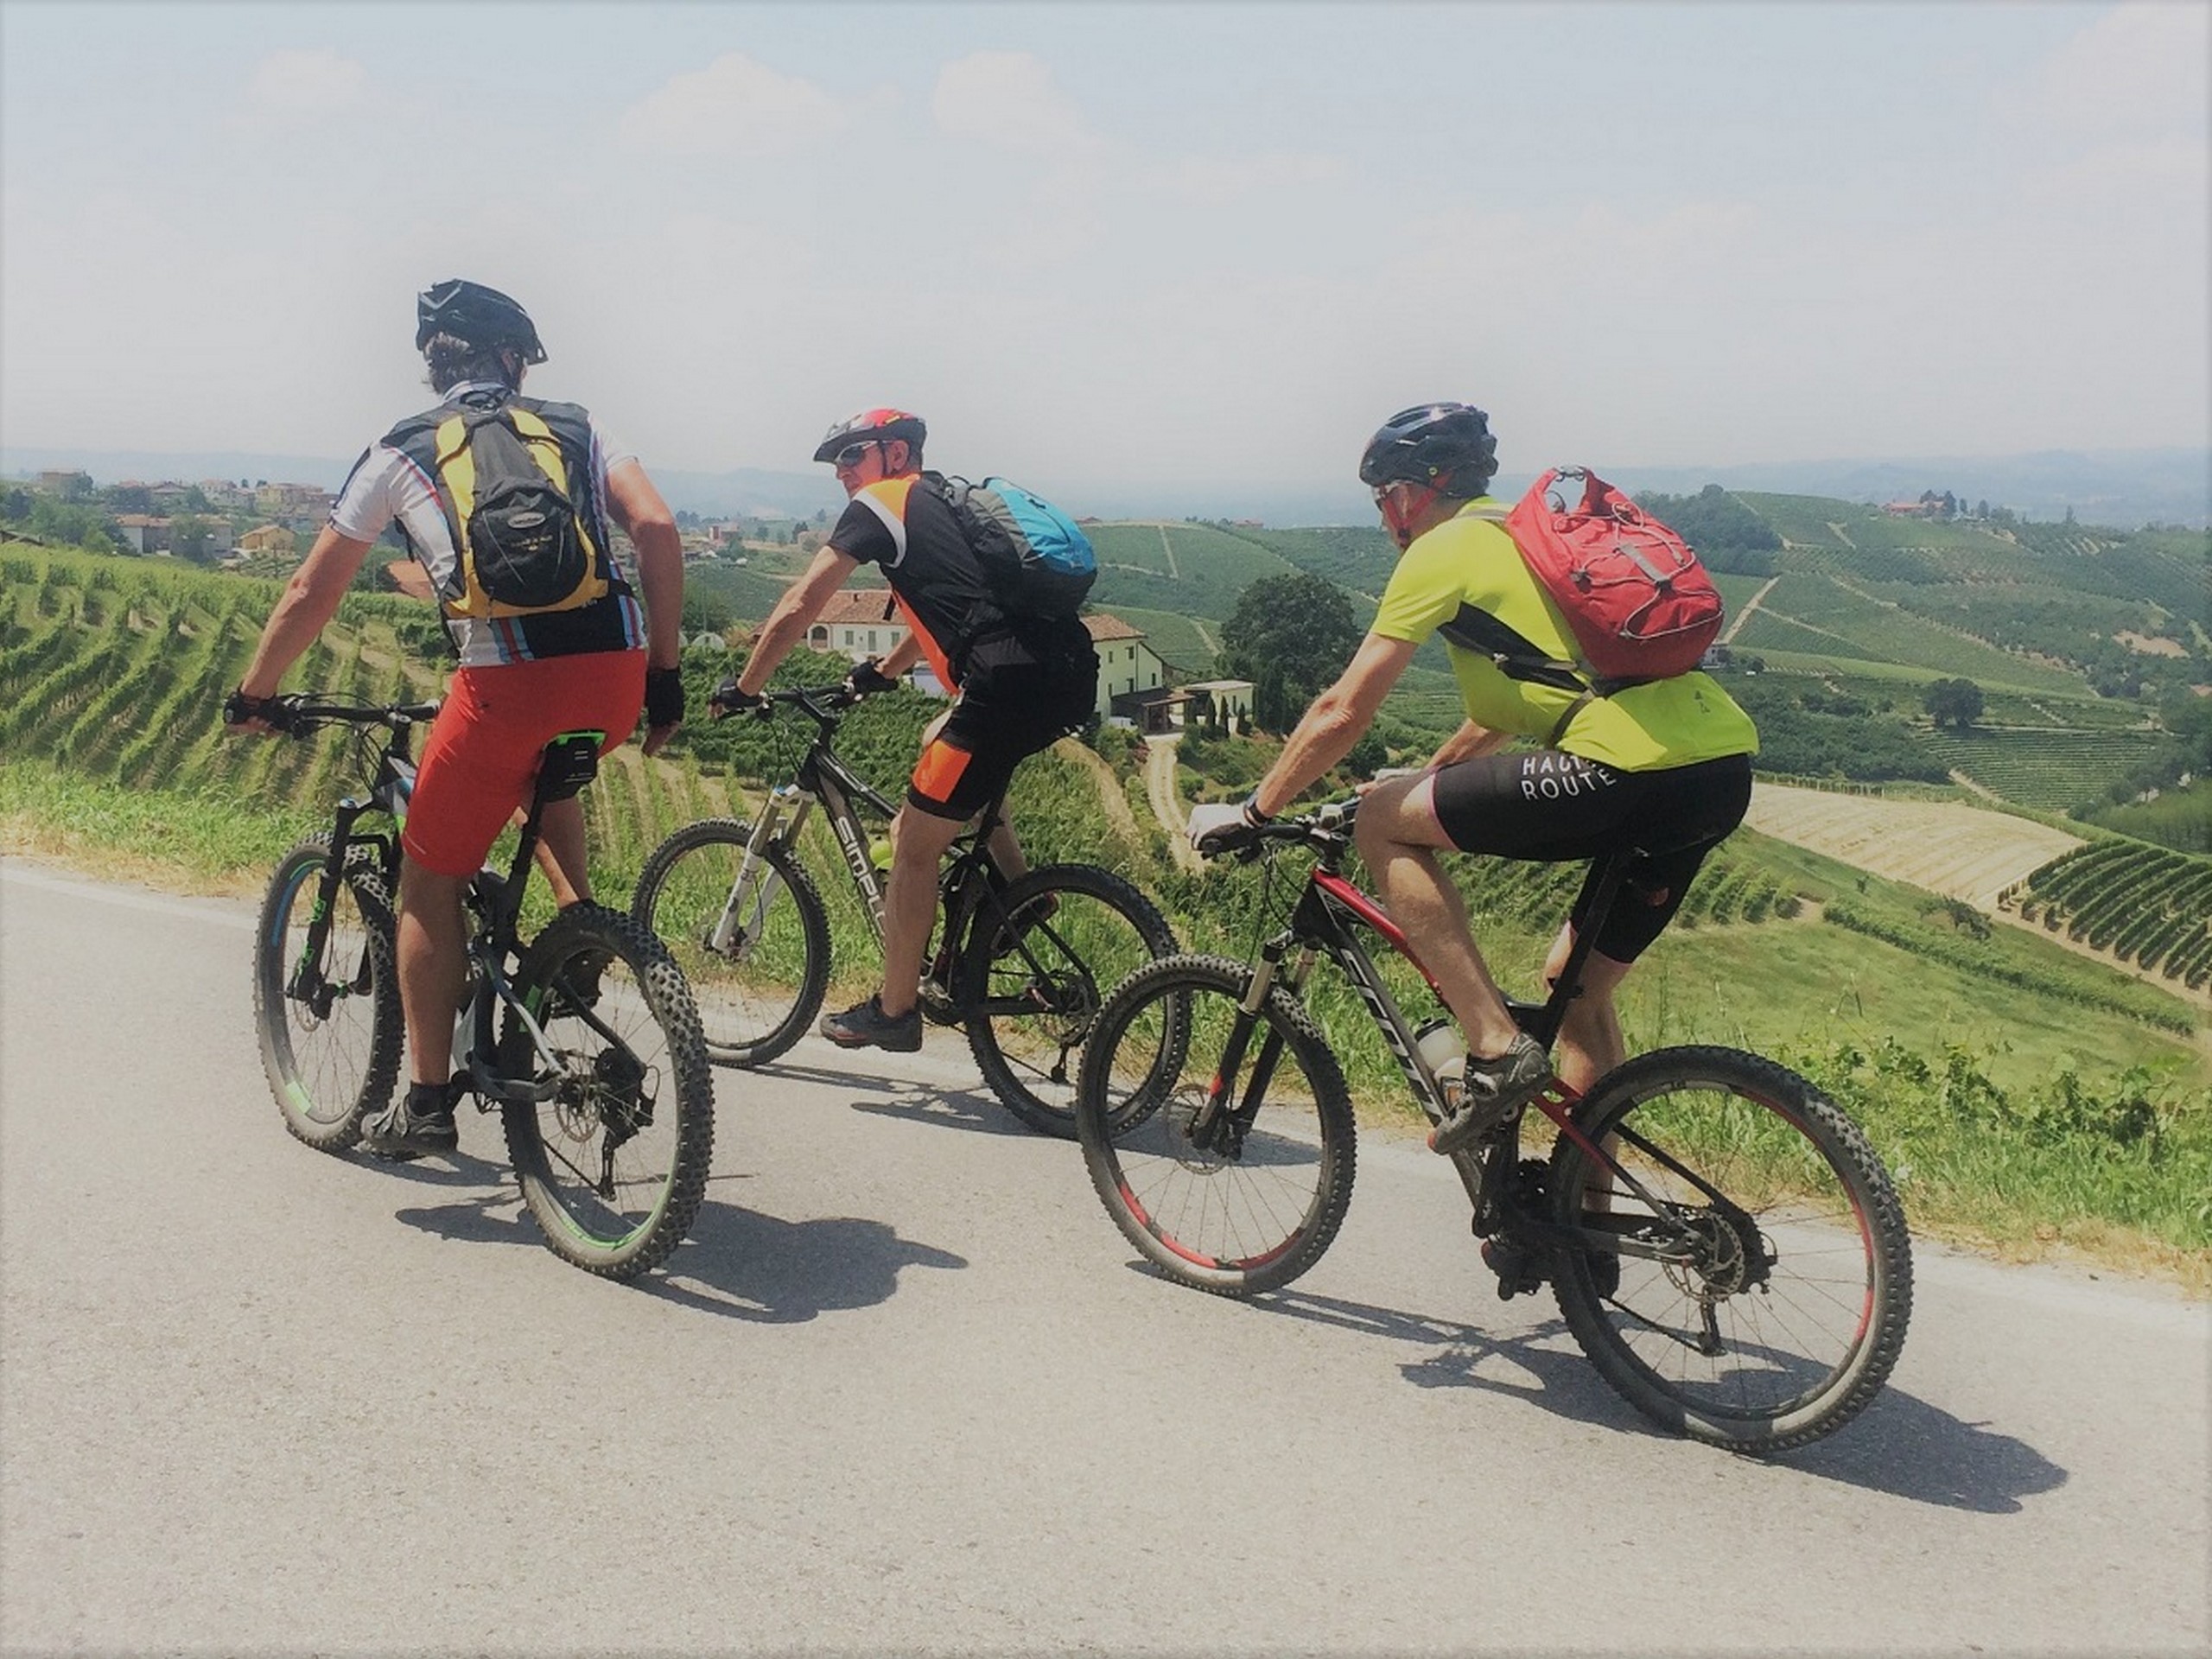 Group of cyclists in Italy